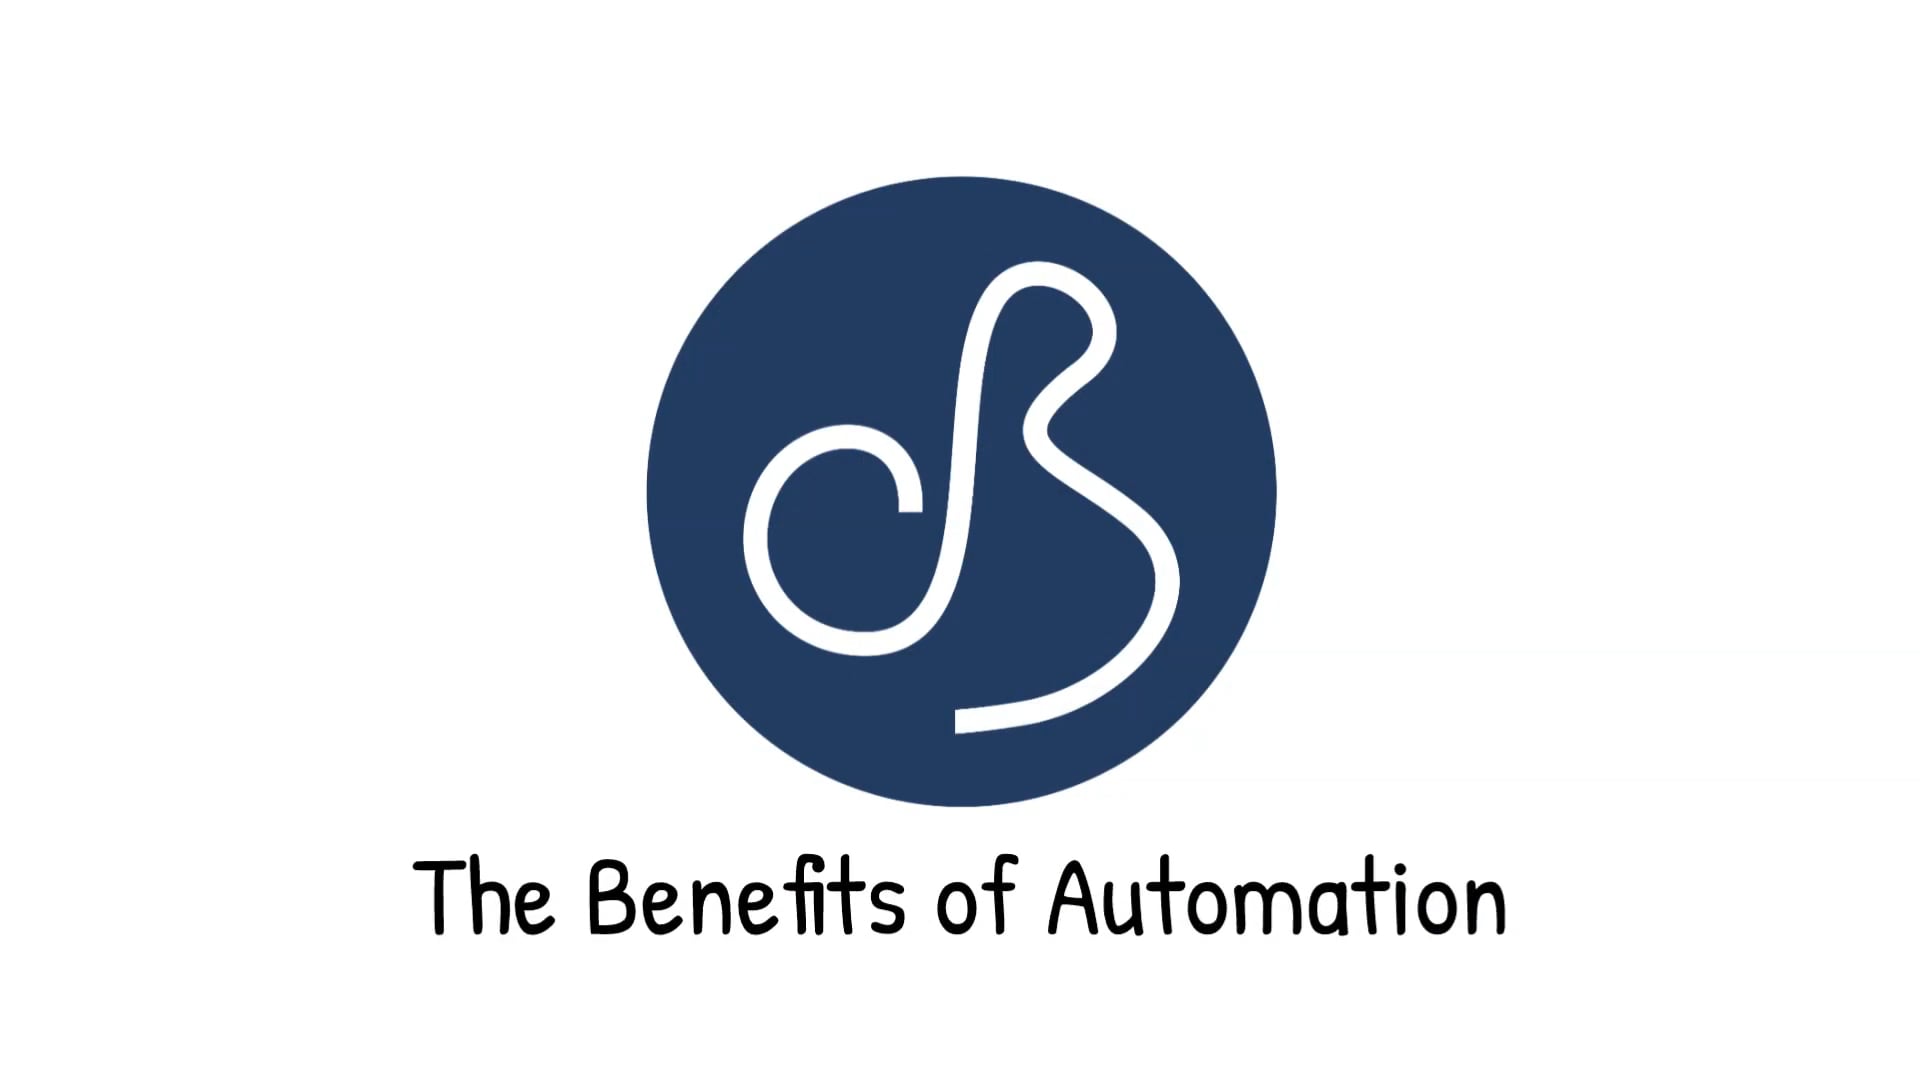 Benefits of automation